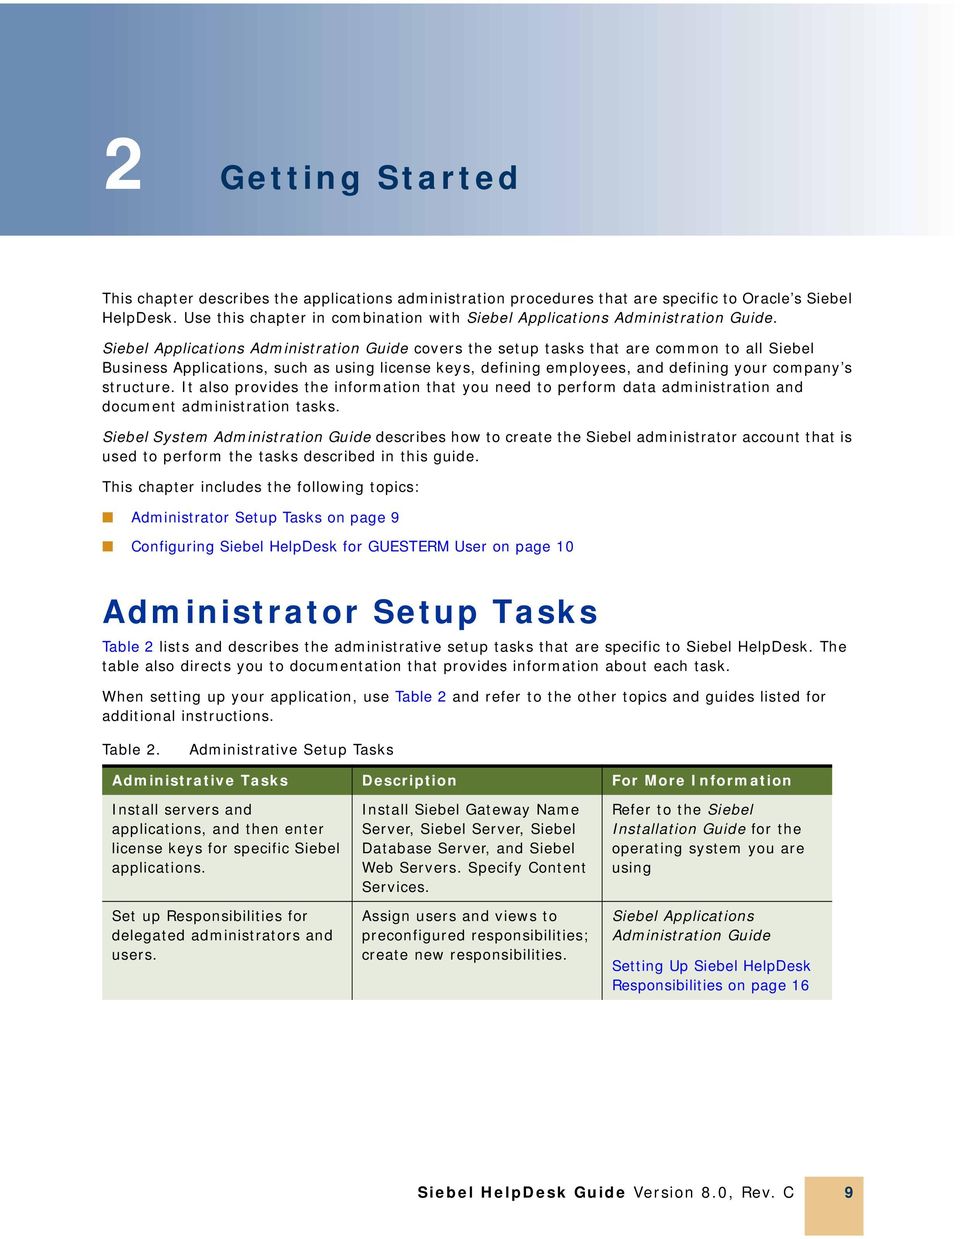 Siebel Applications Administration Guide covers the setup tasks that are common to all Siebel Business Applications, such as using license keys, defining employees, and defining your company s